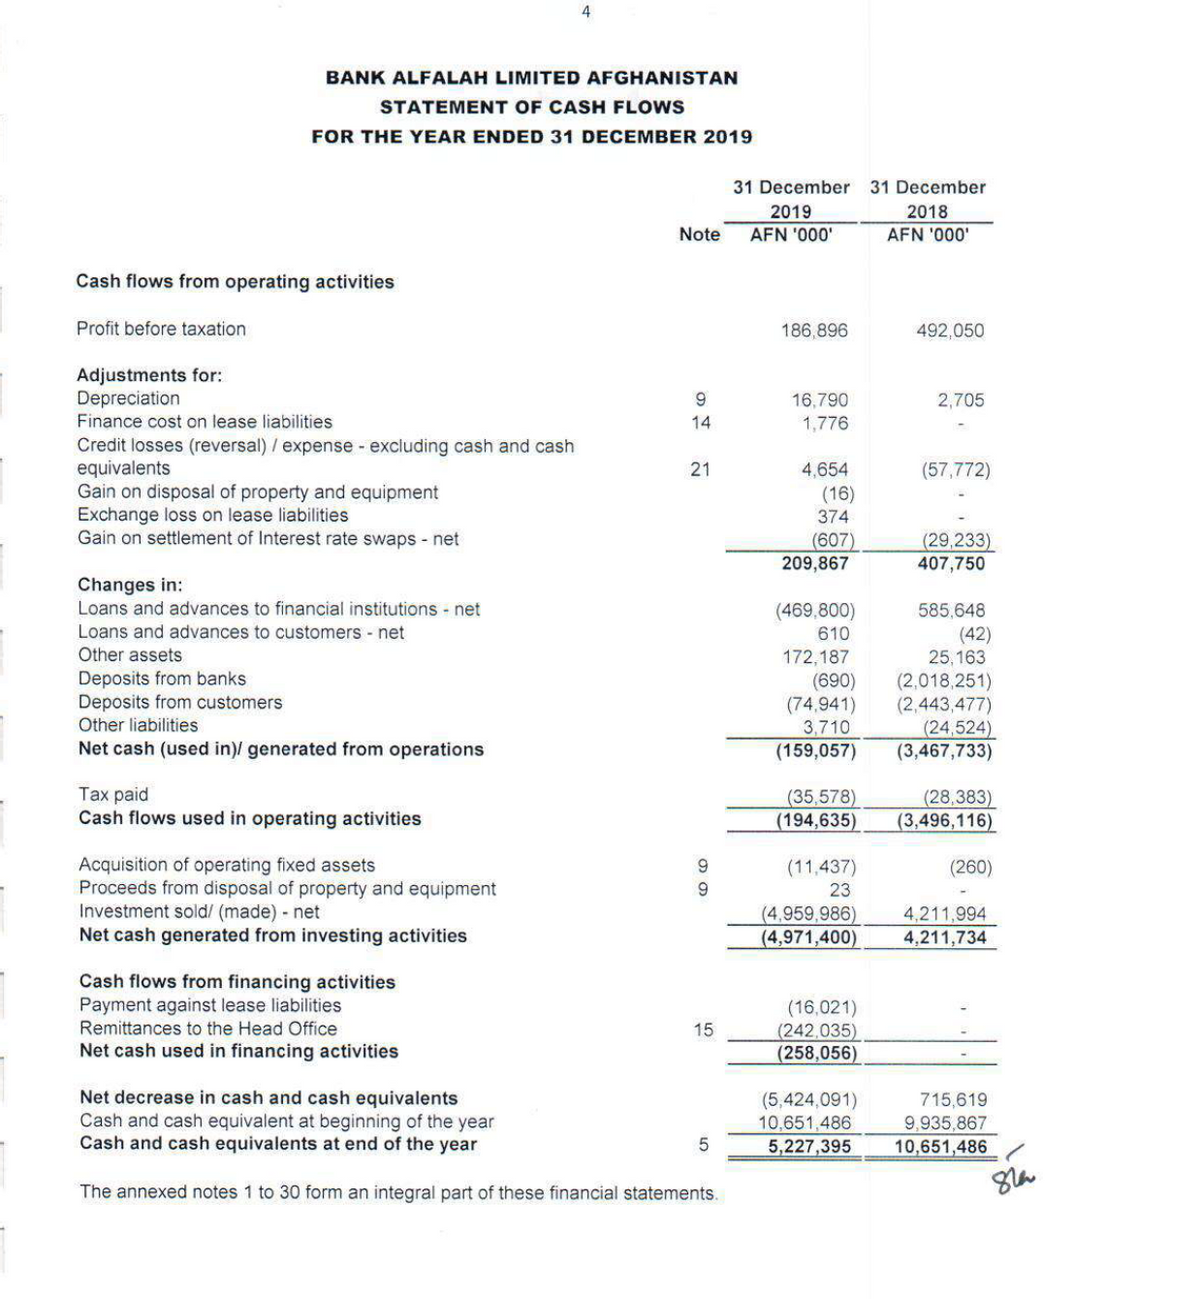 BANK ALFALAH LIMITED AFGHANISTAN
STATEMENT OF CASH FLOWS
FOR THE YEAR ENDED 31 DECEMBER 2019
31 December 31 December
2019
2018
Note
AFN '000'
AFN '000'
Cash flows from operating activities
Profit before taxation
186,896
492,050
Adjustments for:
Depreciation
Finance cost on lease liabilities
9.
16,790
2,705
14
1,776
Credit losses (reversal) / expense excluding cash and cash
equivalents
Gain on disposal of property and equipment
Exchange loss on lease liabilities
Gain on settlement of Interest rate swaps - net
21
4,654
(57,772)
(16)
374
(607)
209,867
(29,233)
407,750
Changes in:
Loans and advances to financial institutions net
Loans and advances to customers net
Other assets
(469,800)
610
585,648
(42)
25, 163
Deposits from banks
Deposits from customers
Other liabilities
172,187
(690)
(74,941)
3,710
(2,018,251)
(2,443,477)
(24,524)
(3,467,733)
Net cash (used in)/ generated from operations
(159,057)
Таx paid
Cash flows used in operating activities
(35,578)
(194,635)
(28,383)
(3,496,116)
Acquisition of operating fixed assets
Proceeds from disposal of property and equipment
Investment sold/ (made) - net
Net cash generated from investing activities
9
(11,437)
(260)
23
(4,959,986)
(4,971,400)
4,211,994
4,211,734
Cash flows from financing activities
Payment against lease liabilities
Remittances to the Head Office
(16,021)
(242,035)
(258,056)
15
Net cash used in financing activities
Net decrease in cash and cash equivalents
Cash and cash equivalent at beginning of the year
Cash and cash equivalents at end of the year
(5,424,091)
10,651,486
5,227,395
715,619
9,935,867
10,651,486
The annexed notes 1 to 30 form an integral part of these financial statements.
